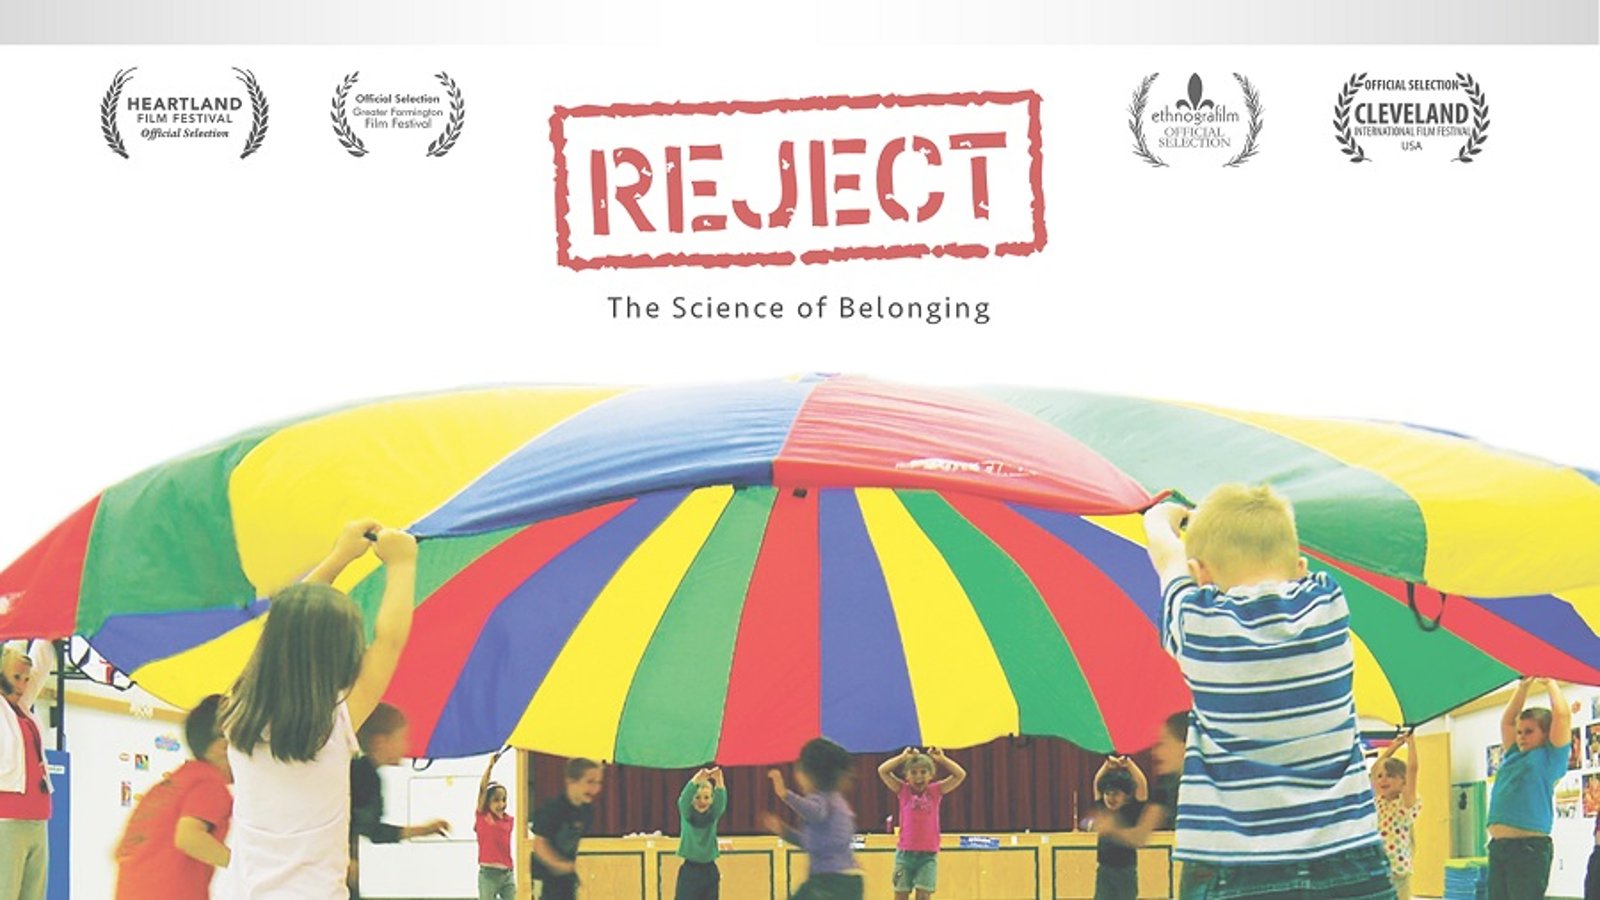 Reject - Social Rejection and the Science of Belonging